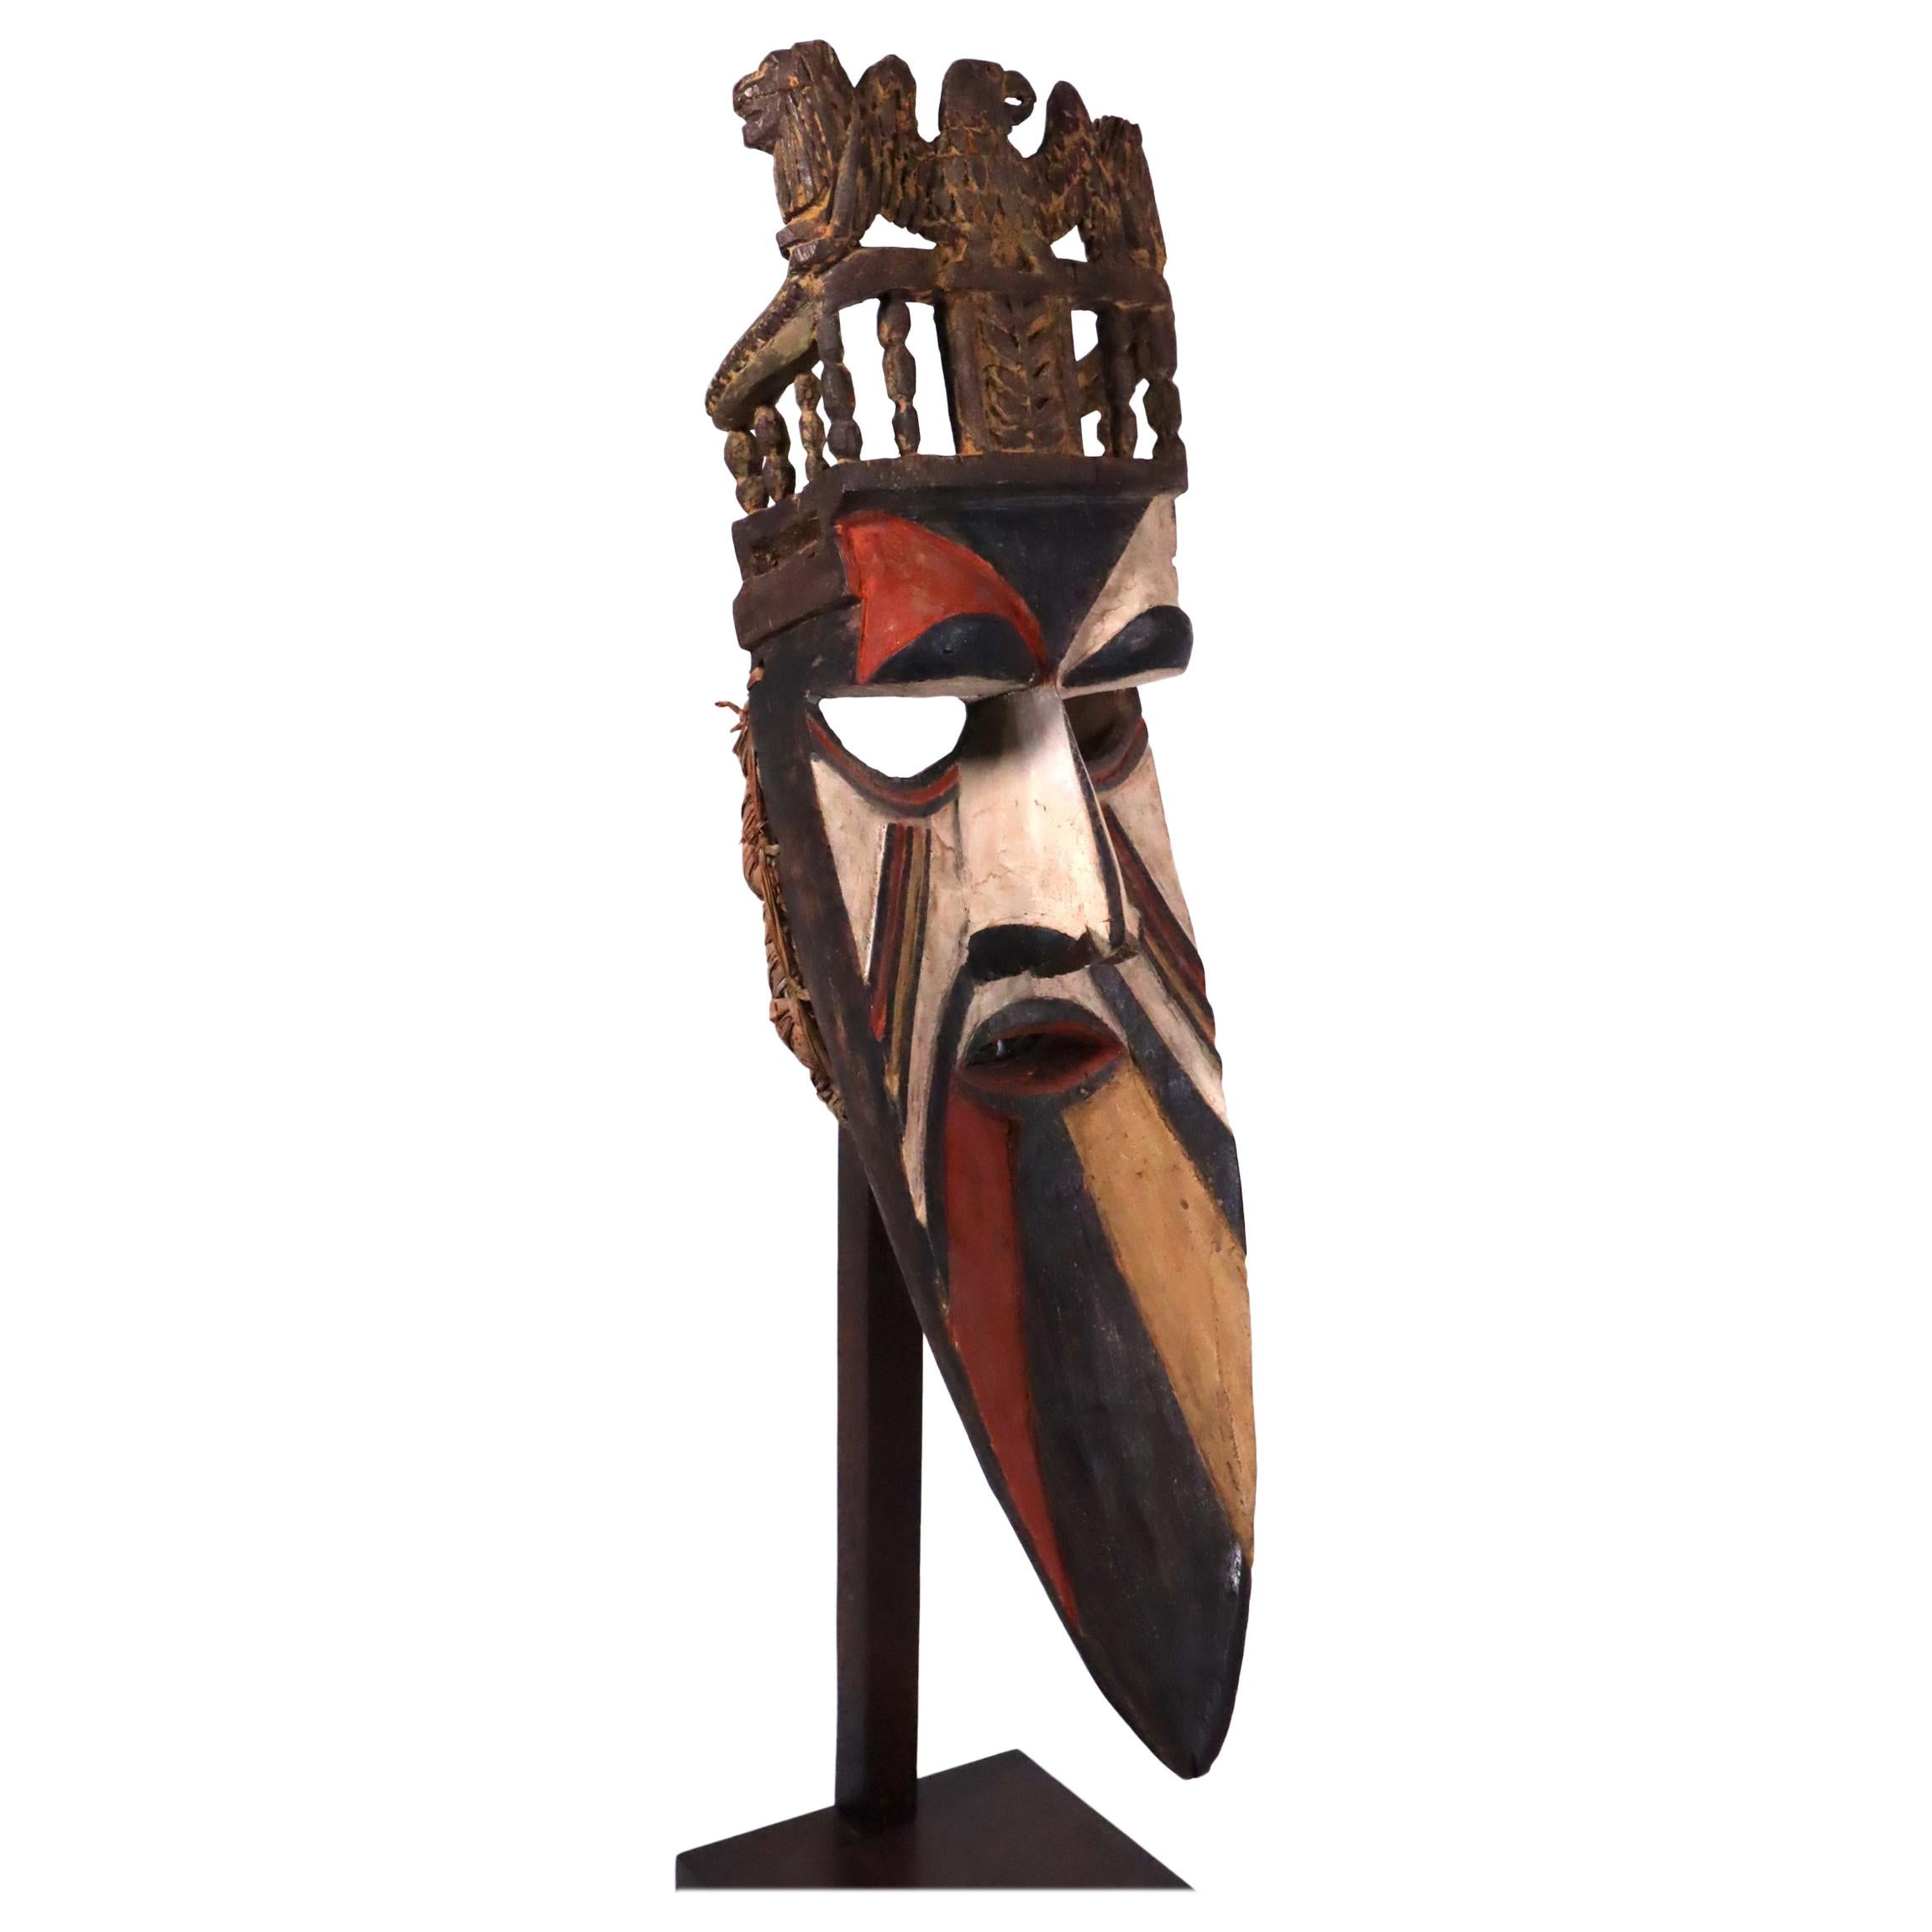 Super Rare Type Igbo Afikpo Theater Mask with Throne Nigeria African Tribal Art For Sale